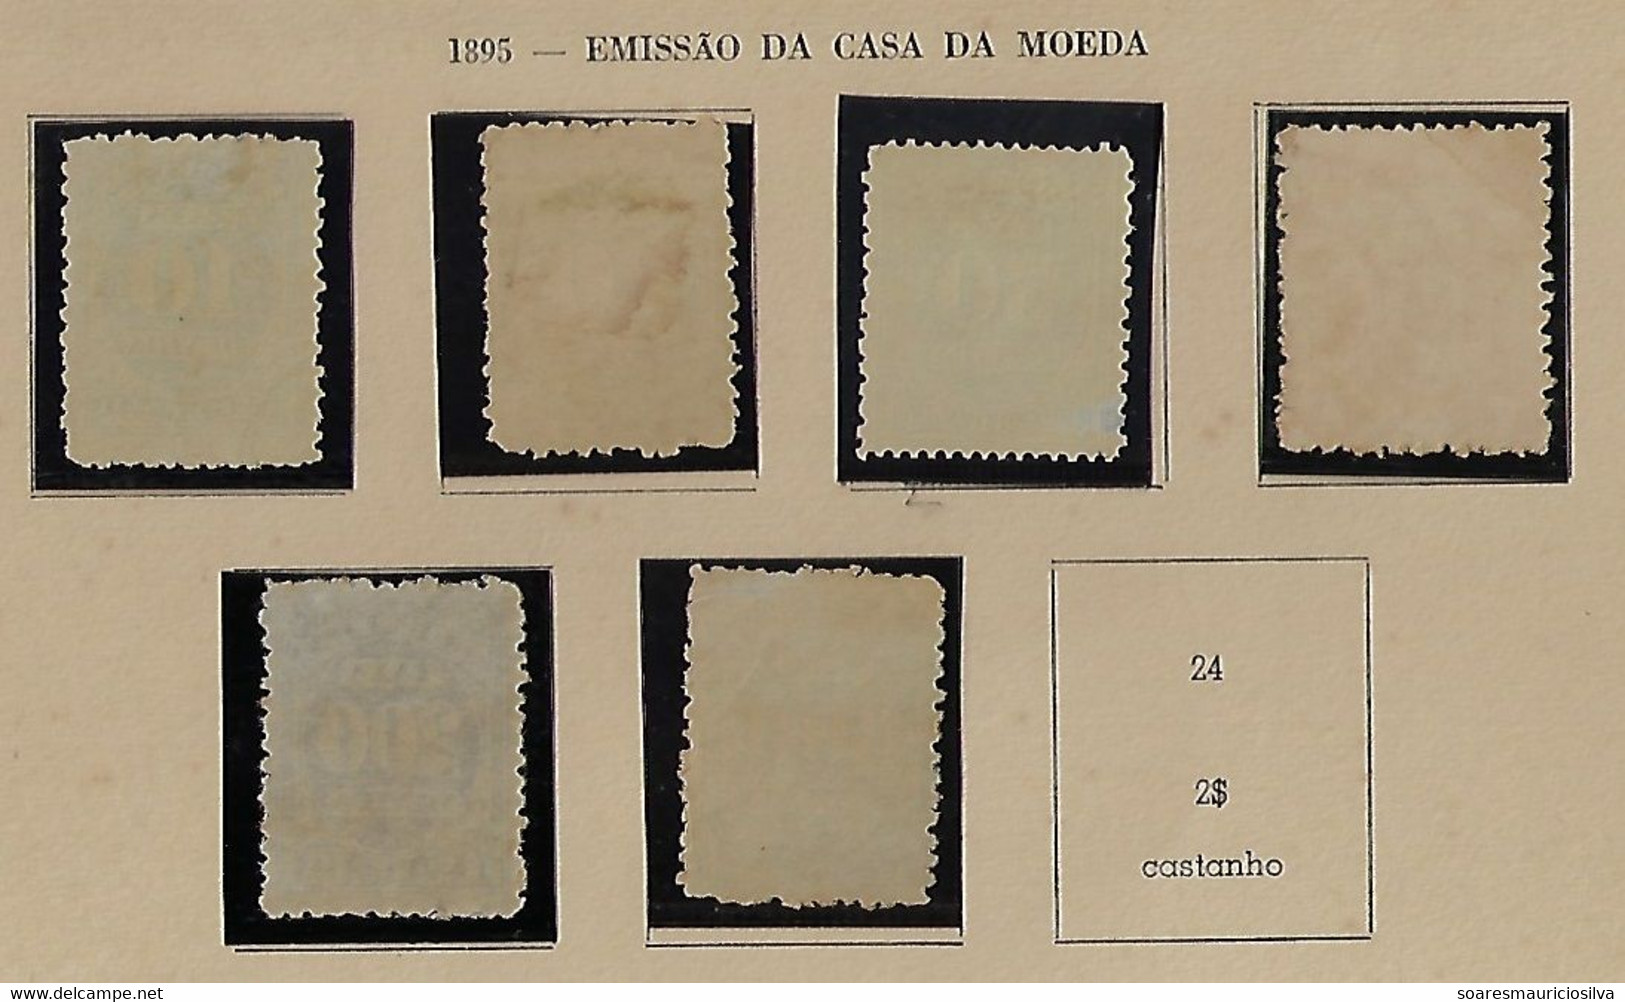 Brazil 1906 Postage Due Typographed Numbers Stamp Colors Used - Strafport